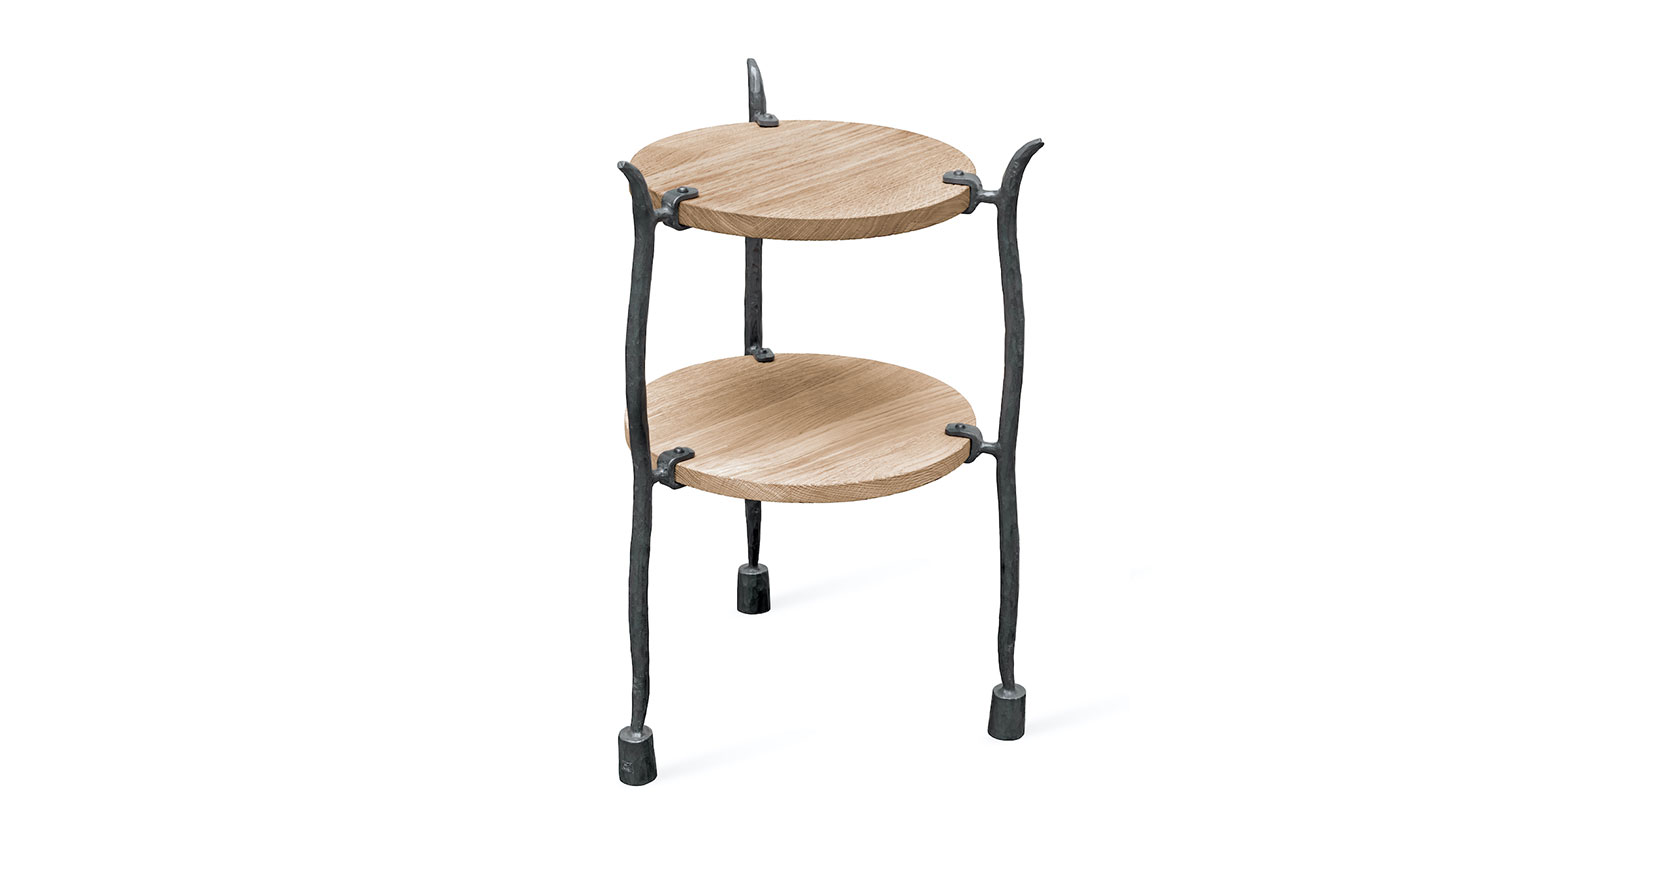 Garouste Bonetti, round side table with curved legs in black wrought iron, double top in oak